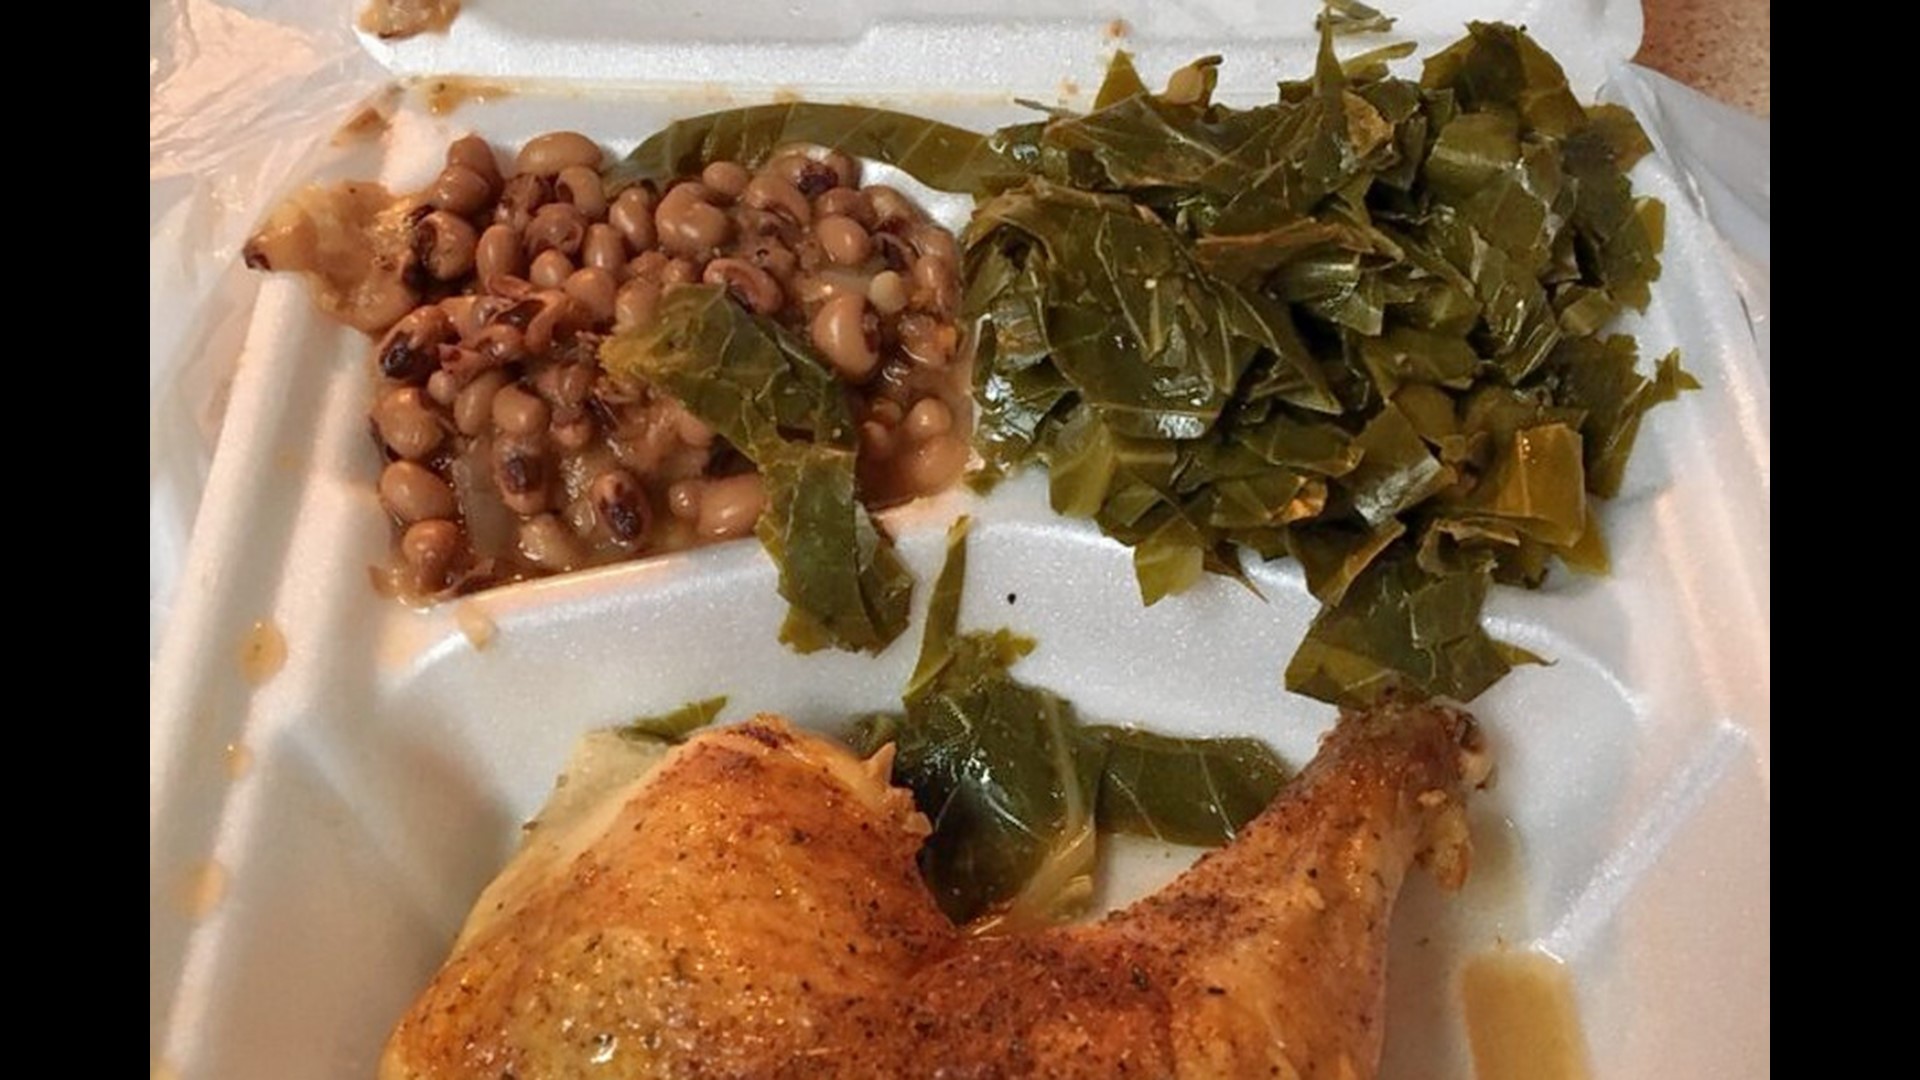 Charlotte's 3 best spots to score soul food on the cheap